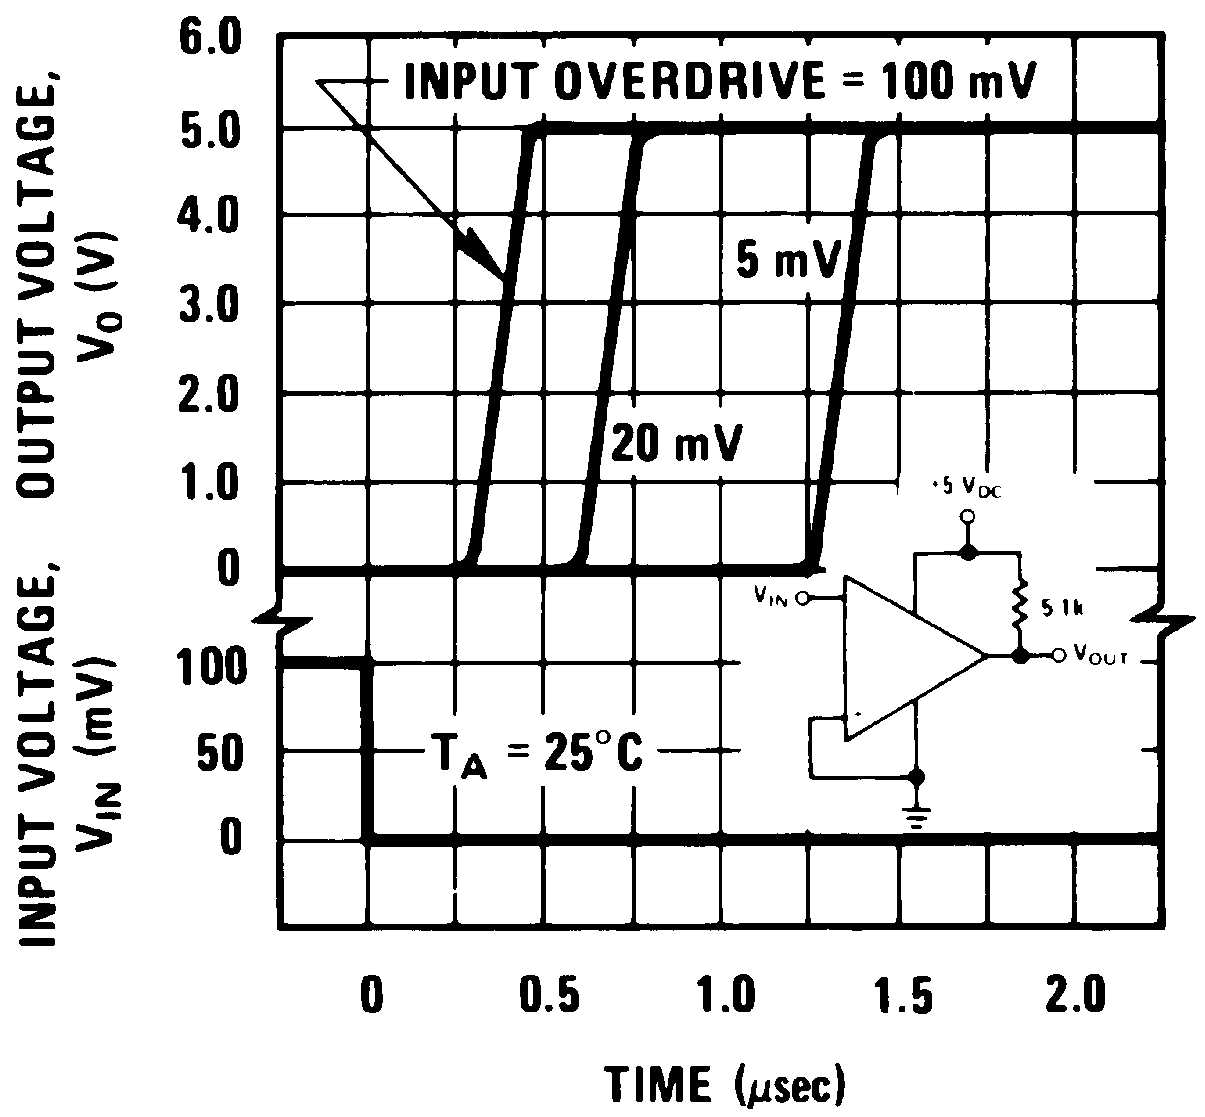 LM339-MIL lm339-mil-response-time-for-various-input-overdrives-positive-transition.png